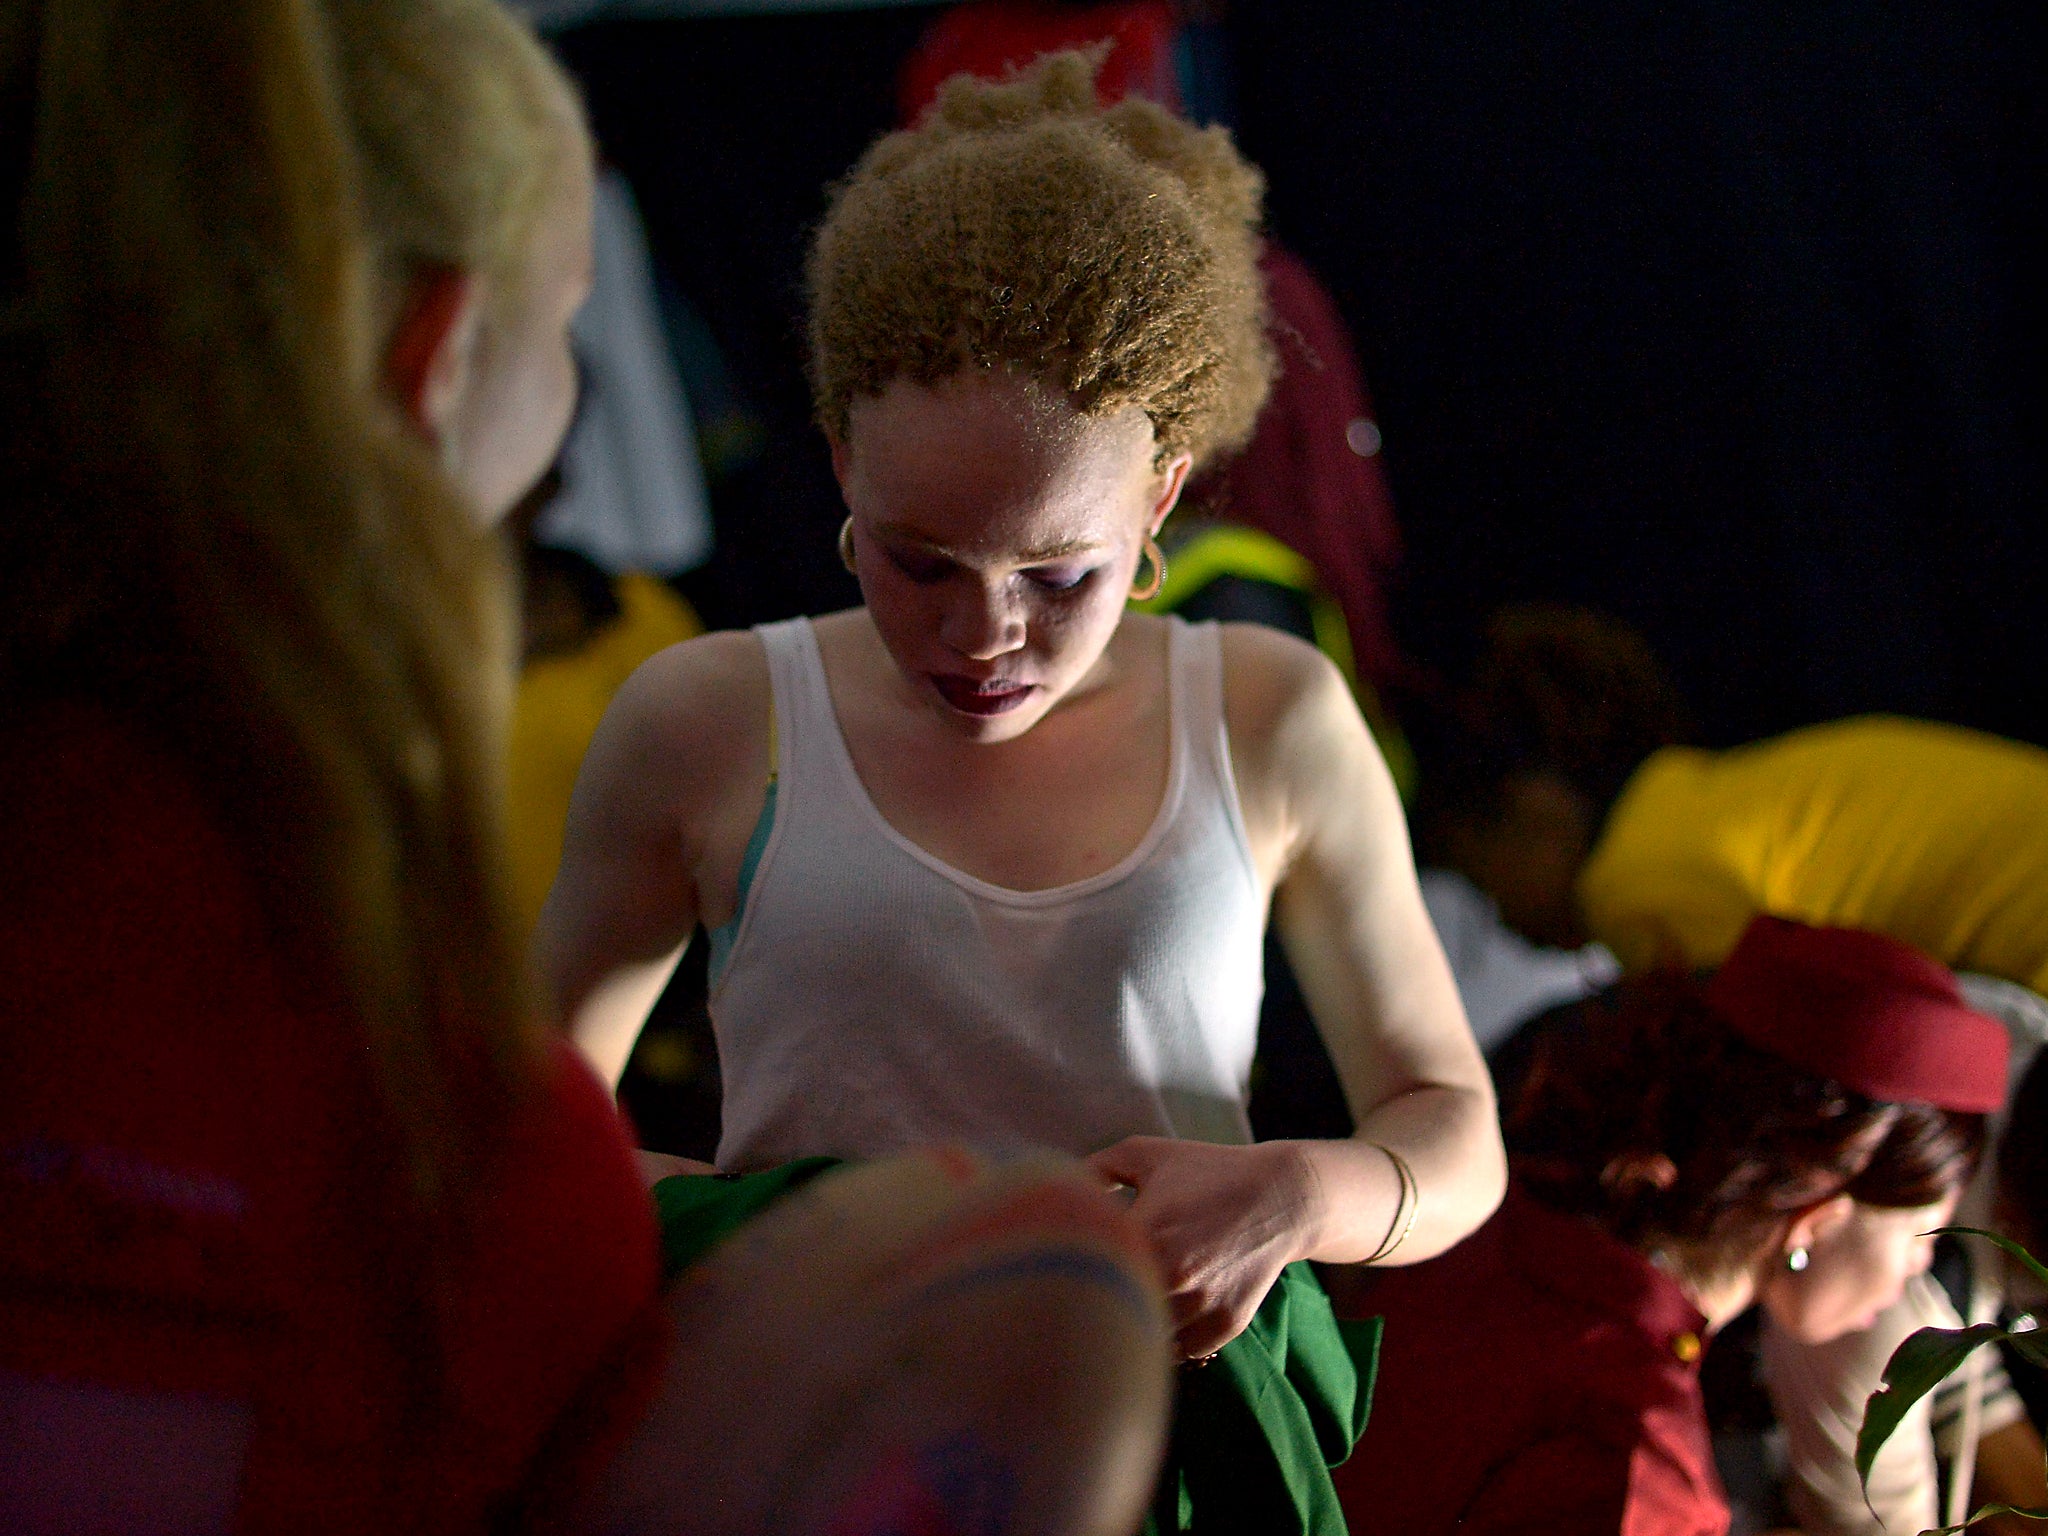 Contestants prepare backstage during a pageant hosted by the Albinism Society of Kenya in Nairobi